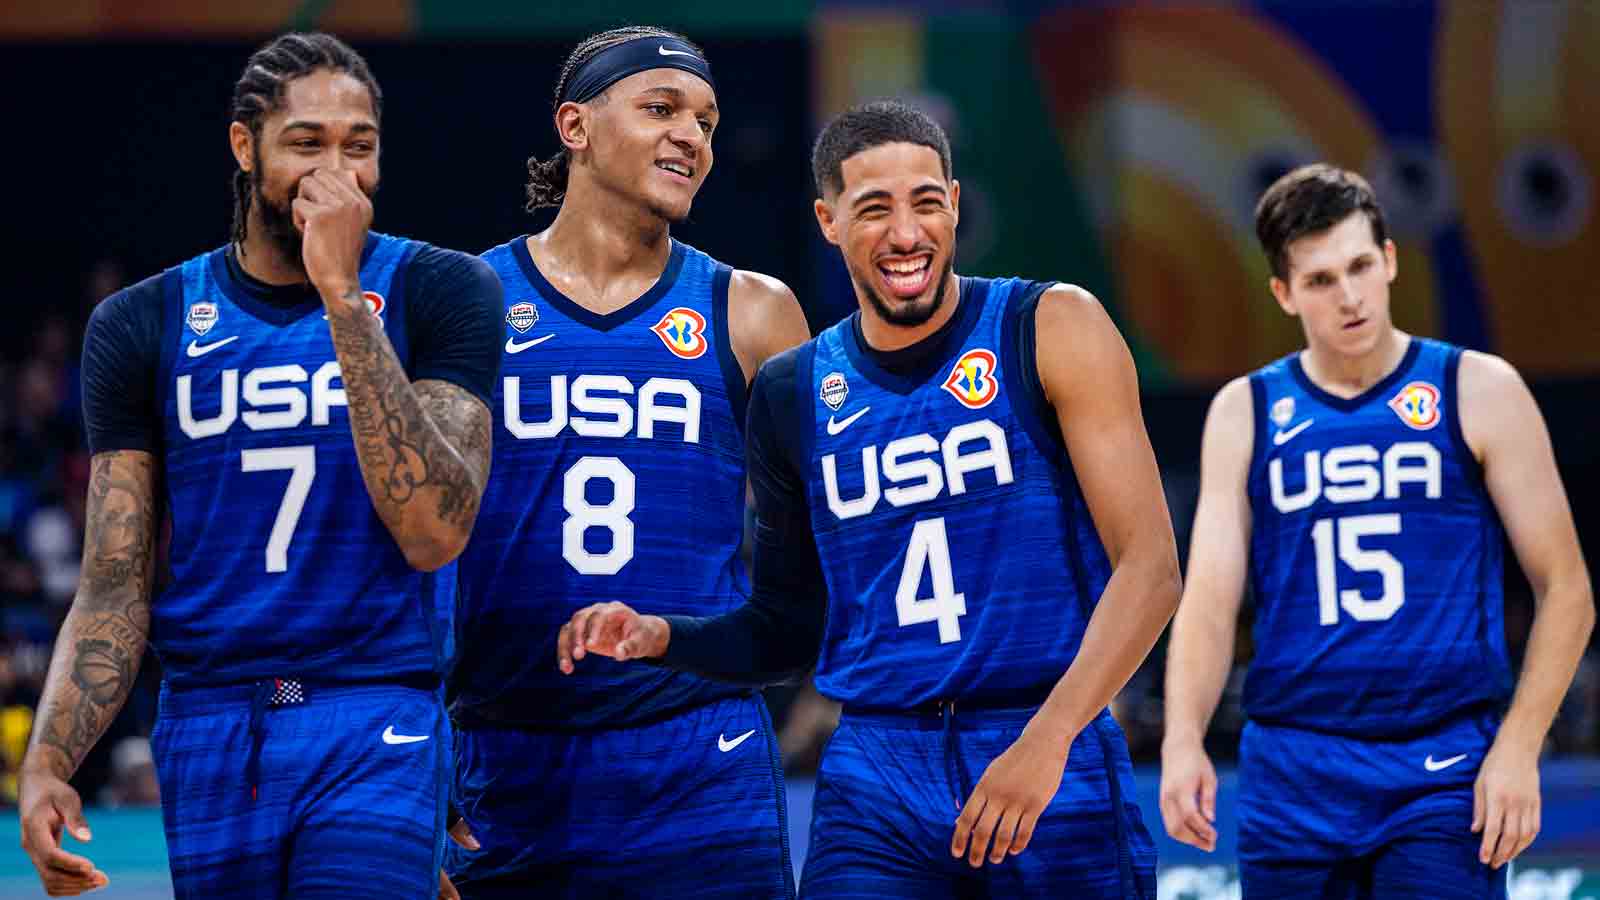 Tyrese Haliburton of Pacers plays for USA in the FIBA World Cup